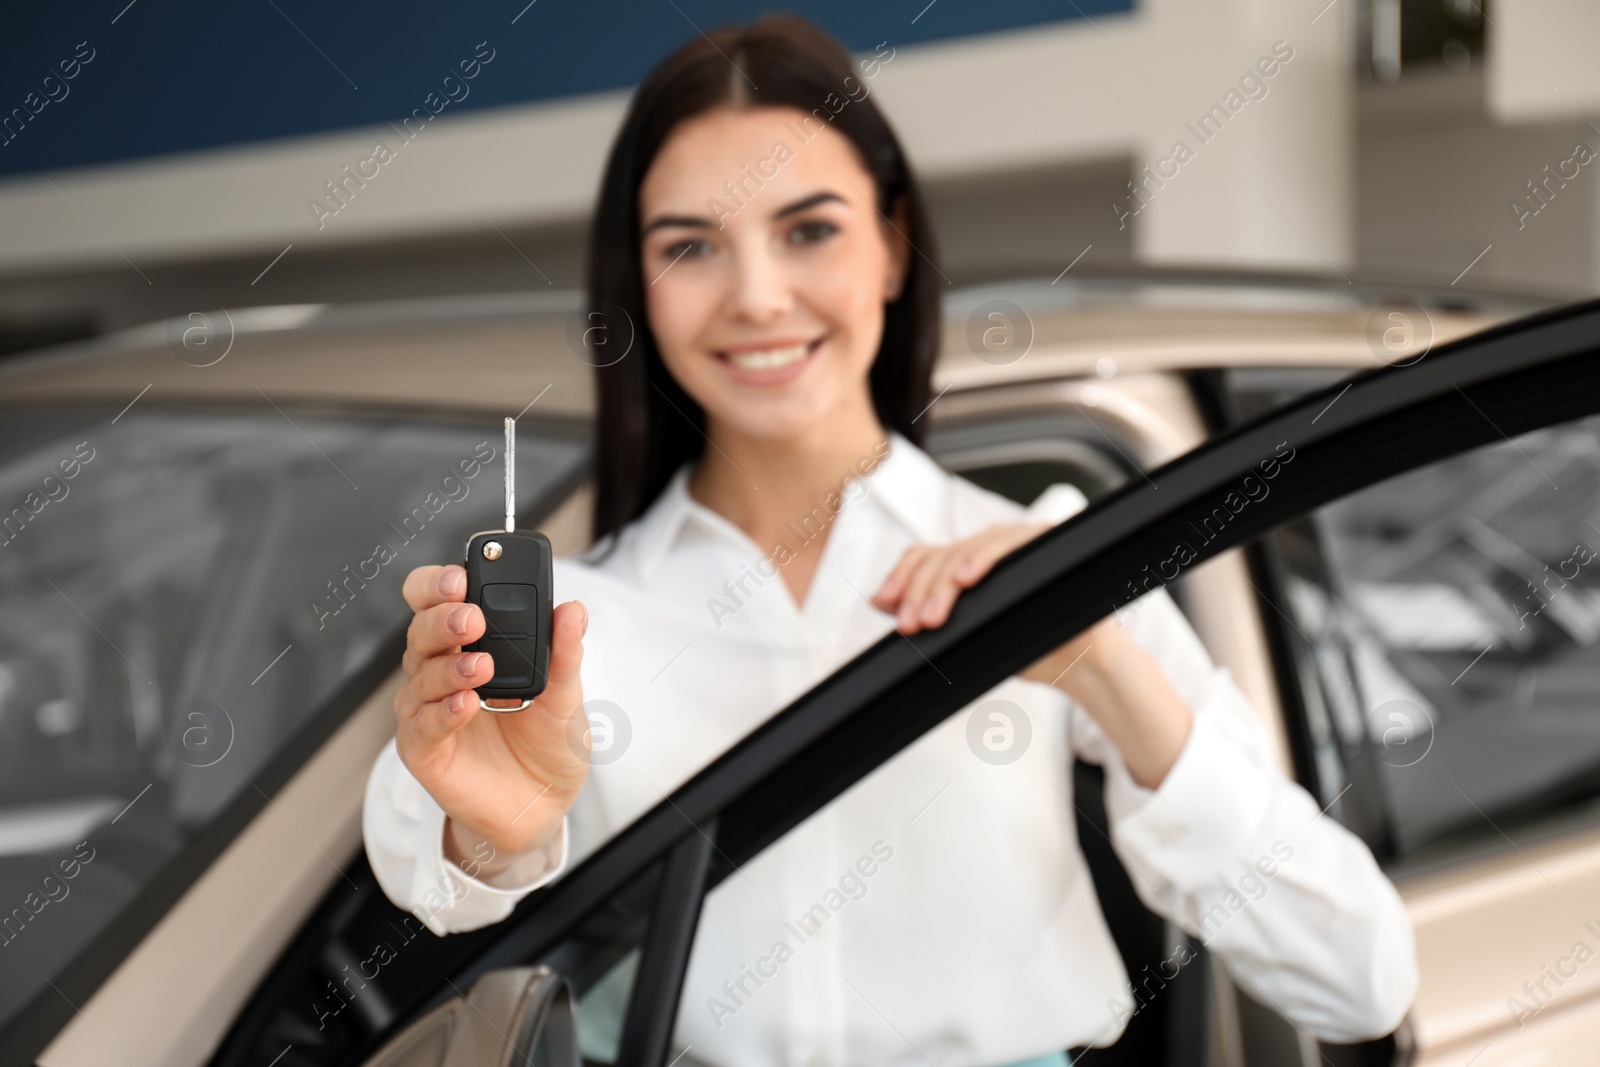 Photo of Saleswoman with key near car in dealership, focus on hand